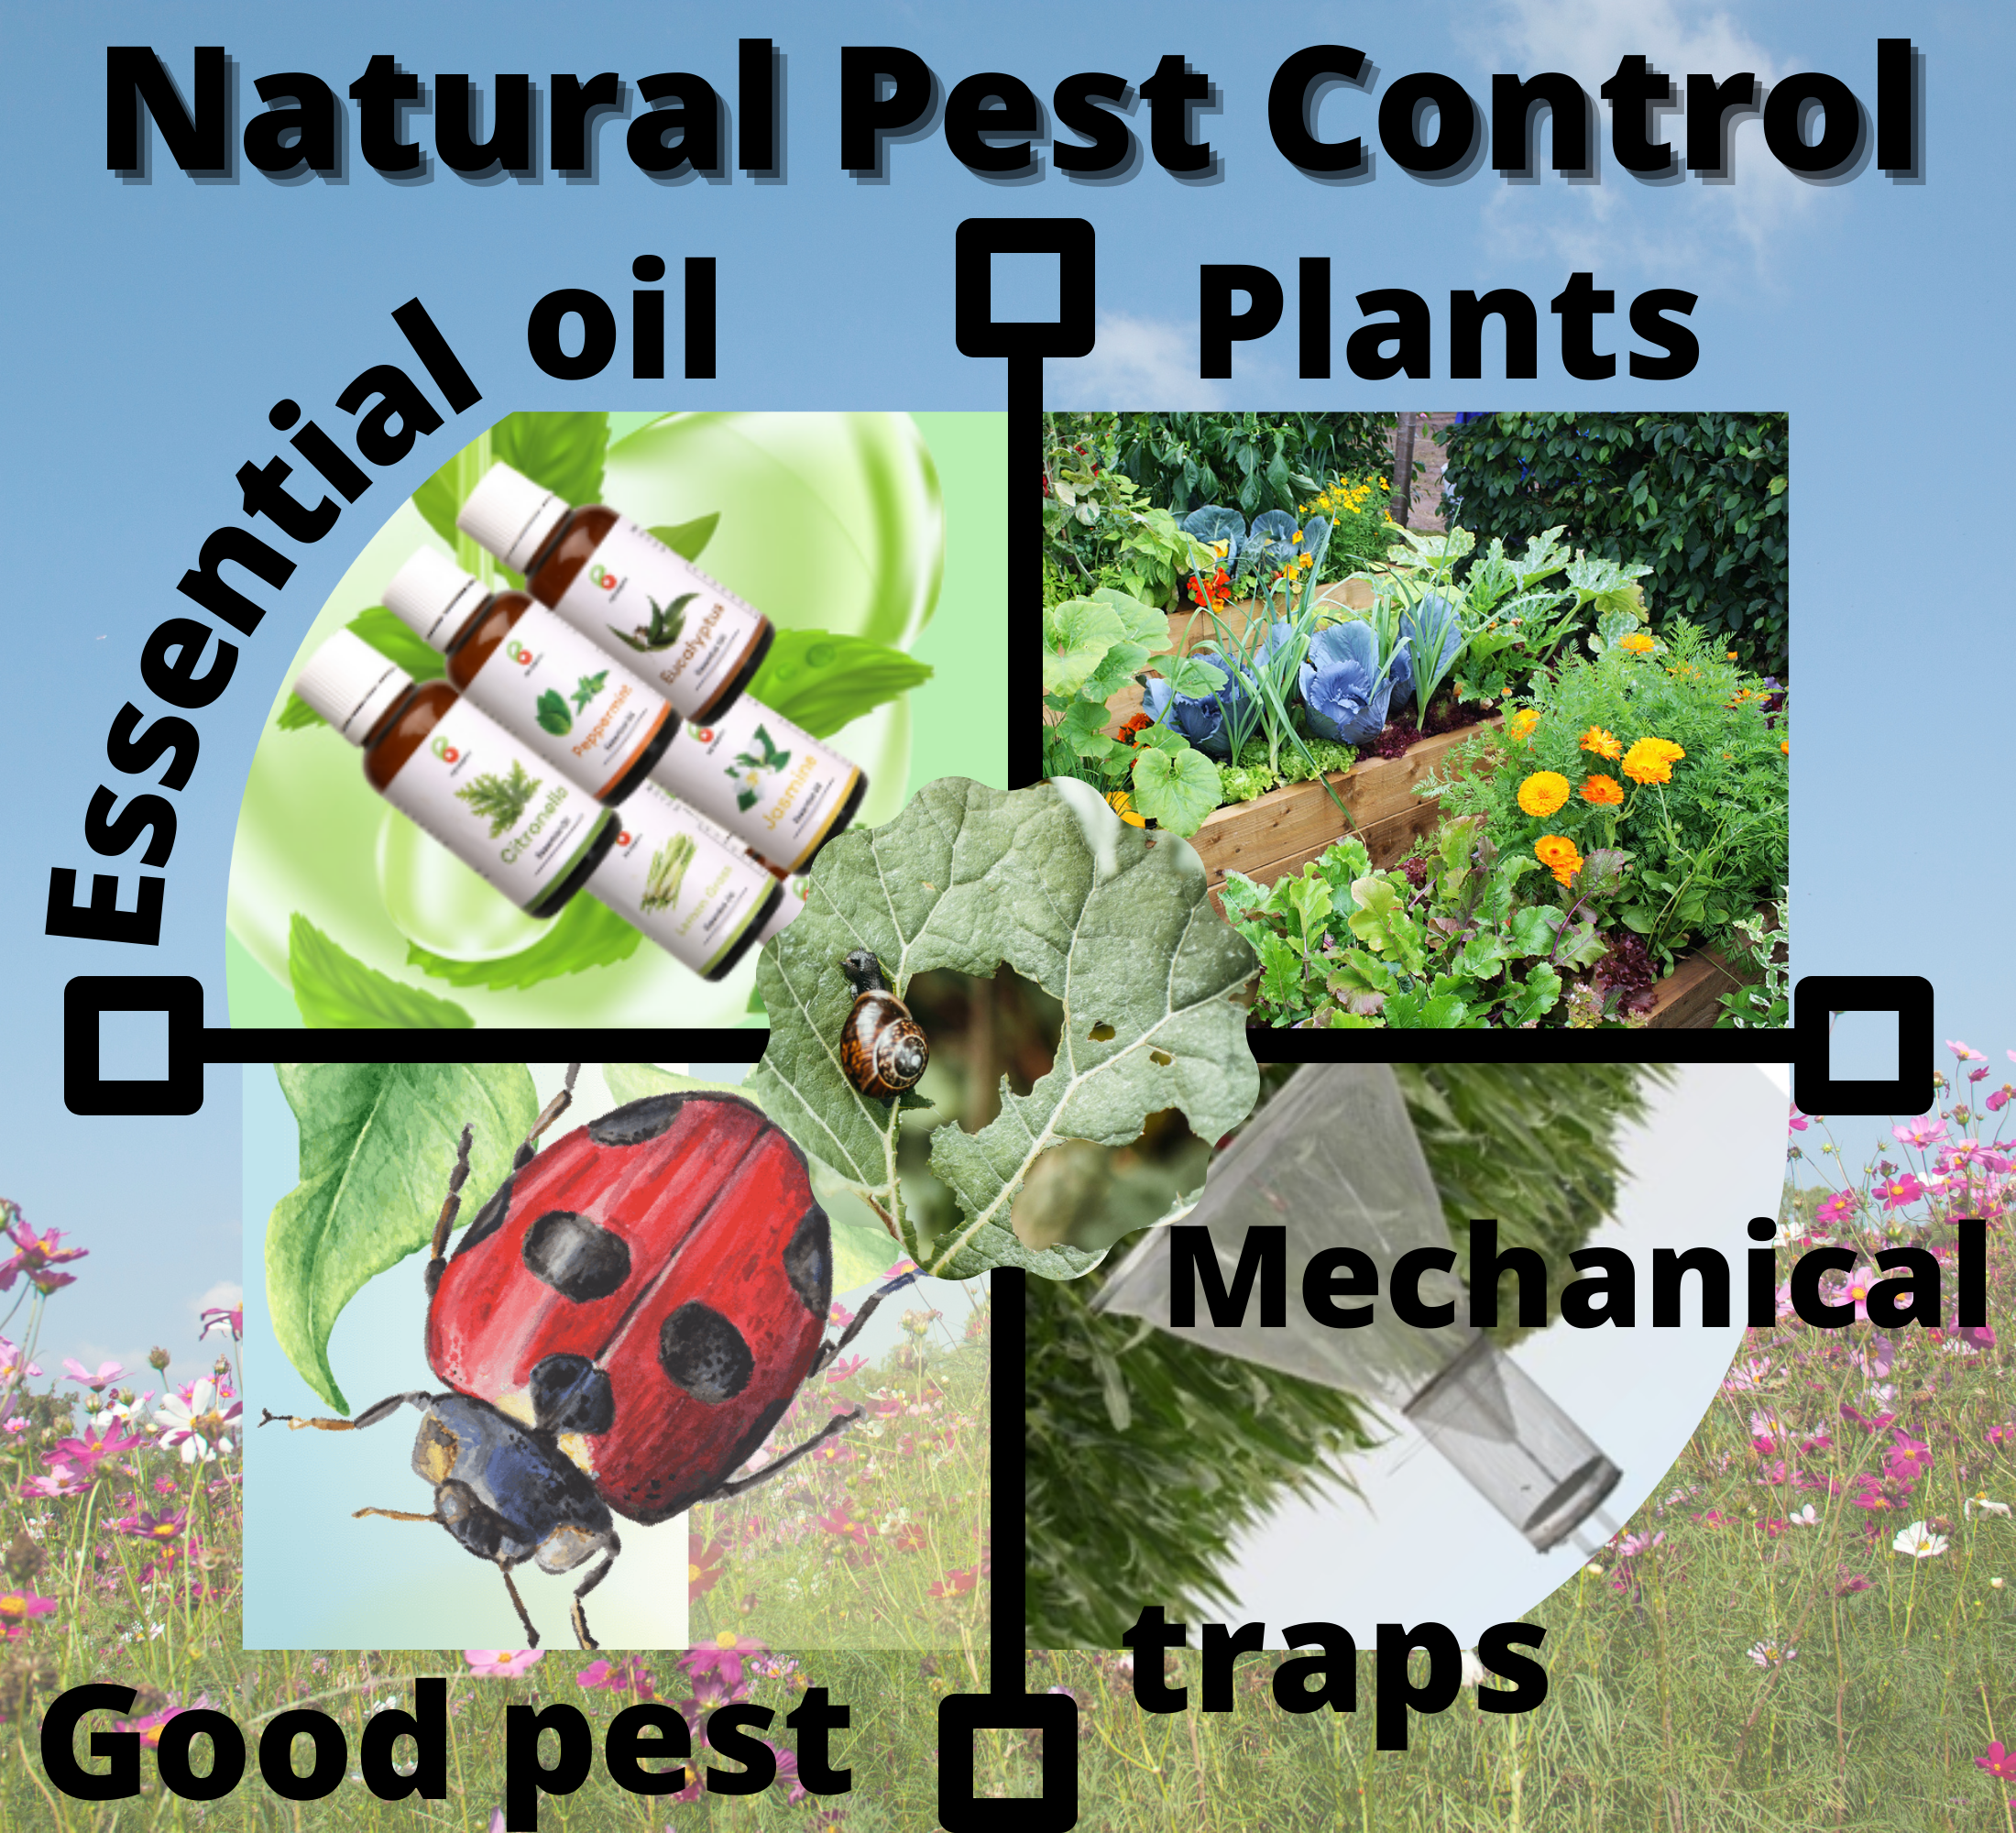 What is natural pest control?